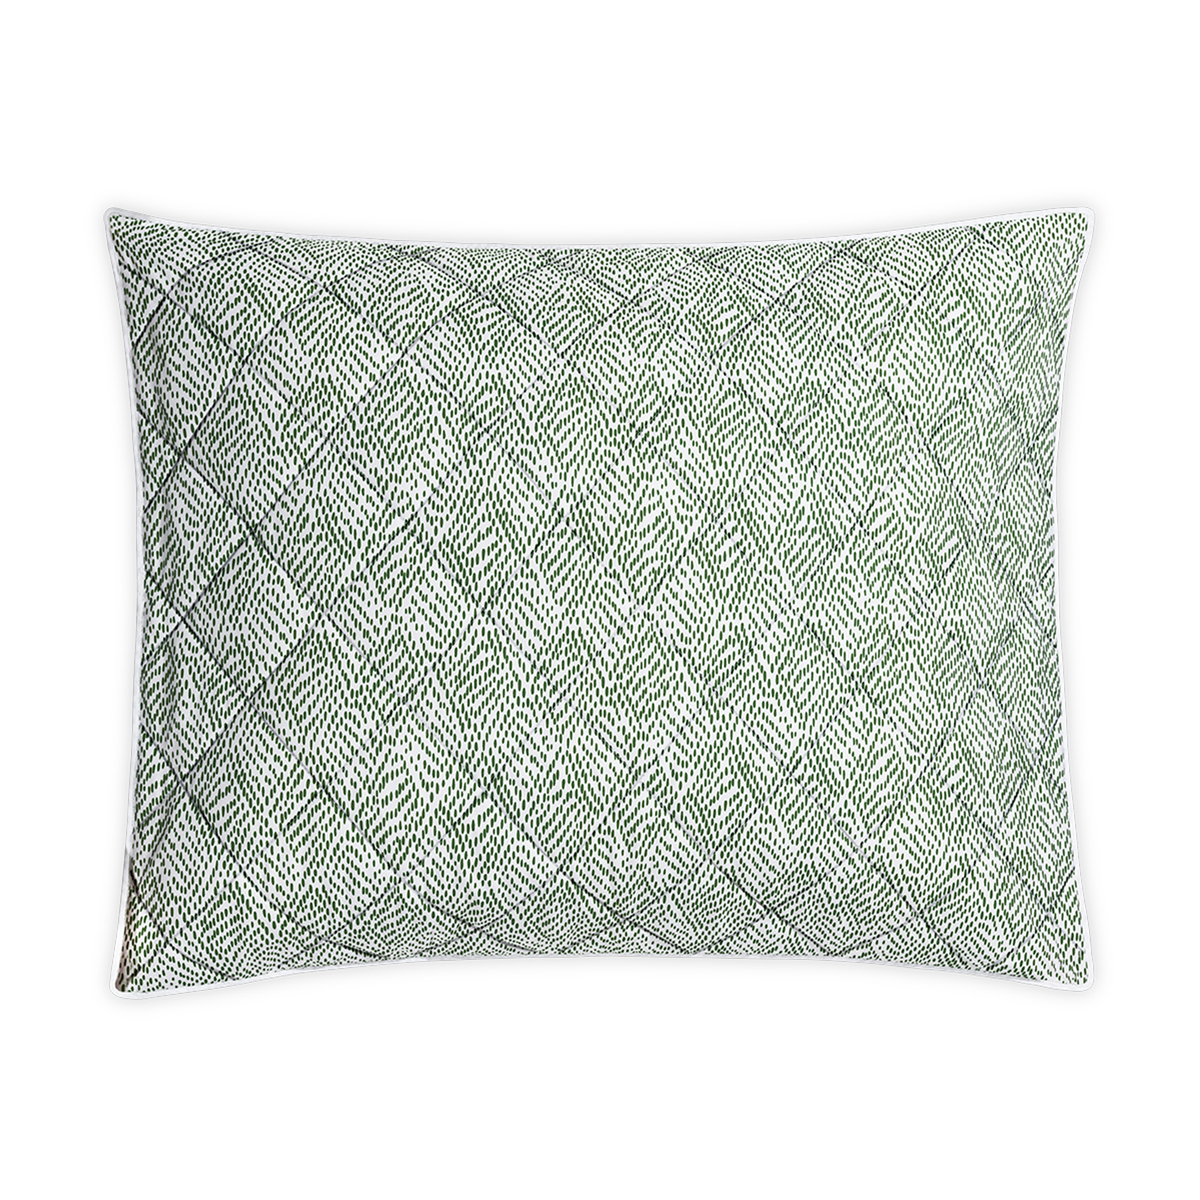 Quilted Standard Sham of Matouk Duma Diamond Bedding in Grass Color